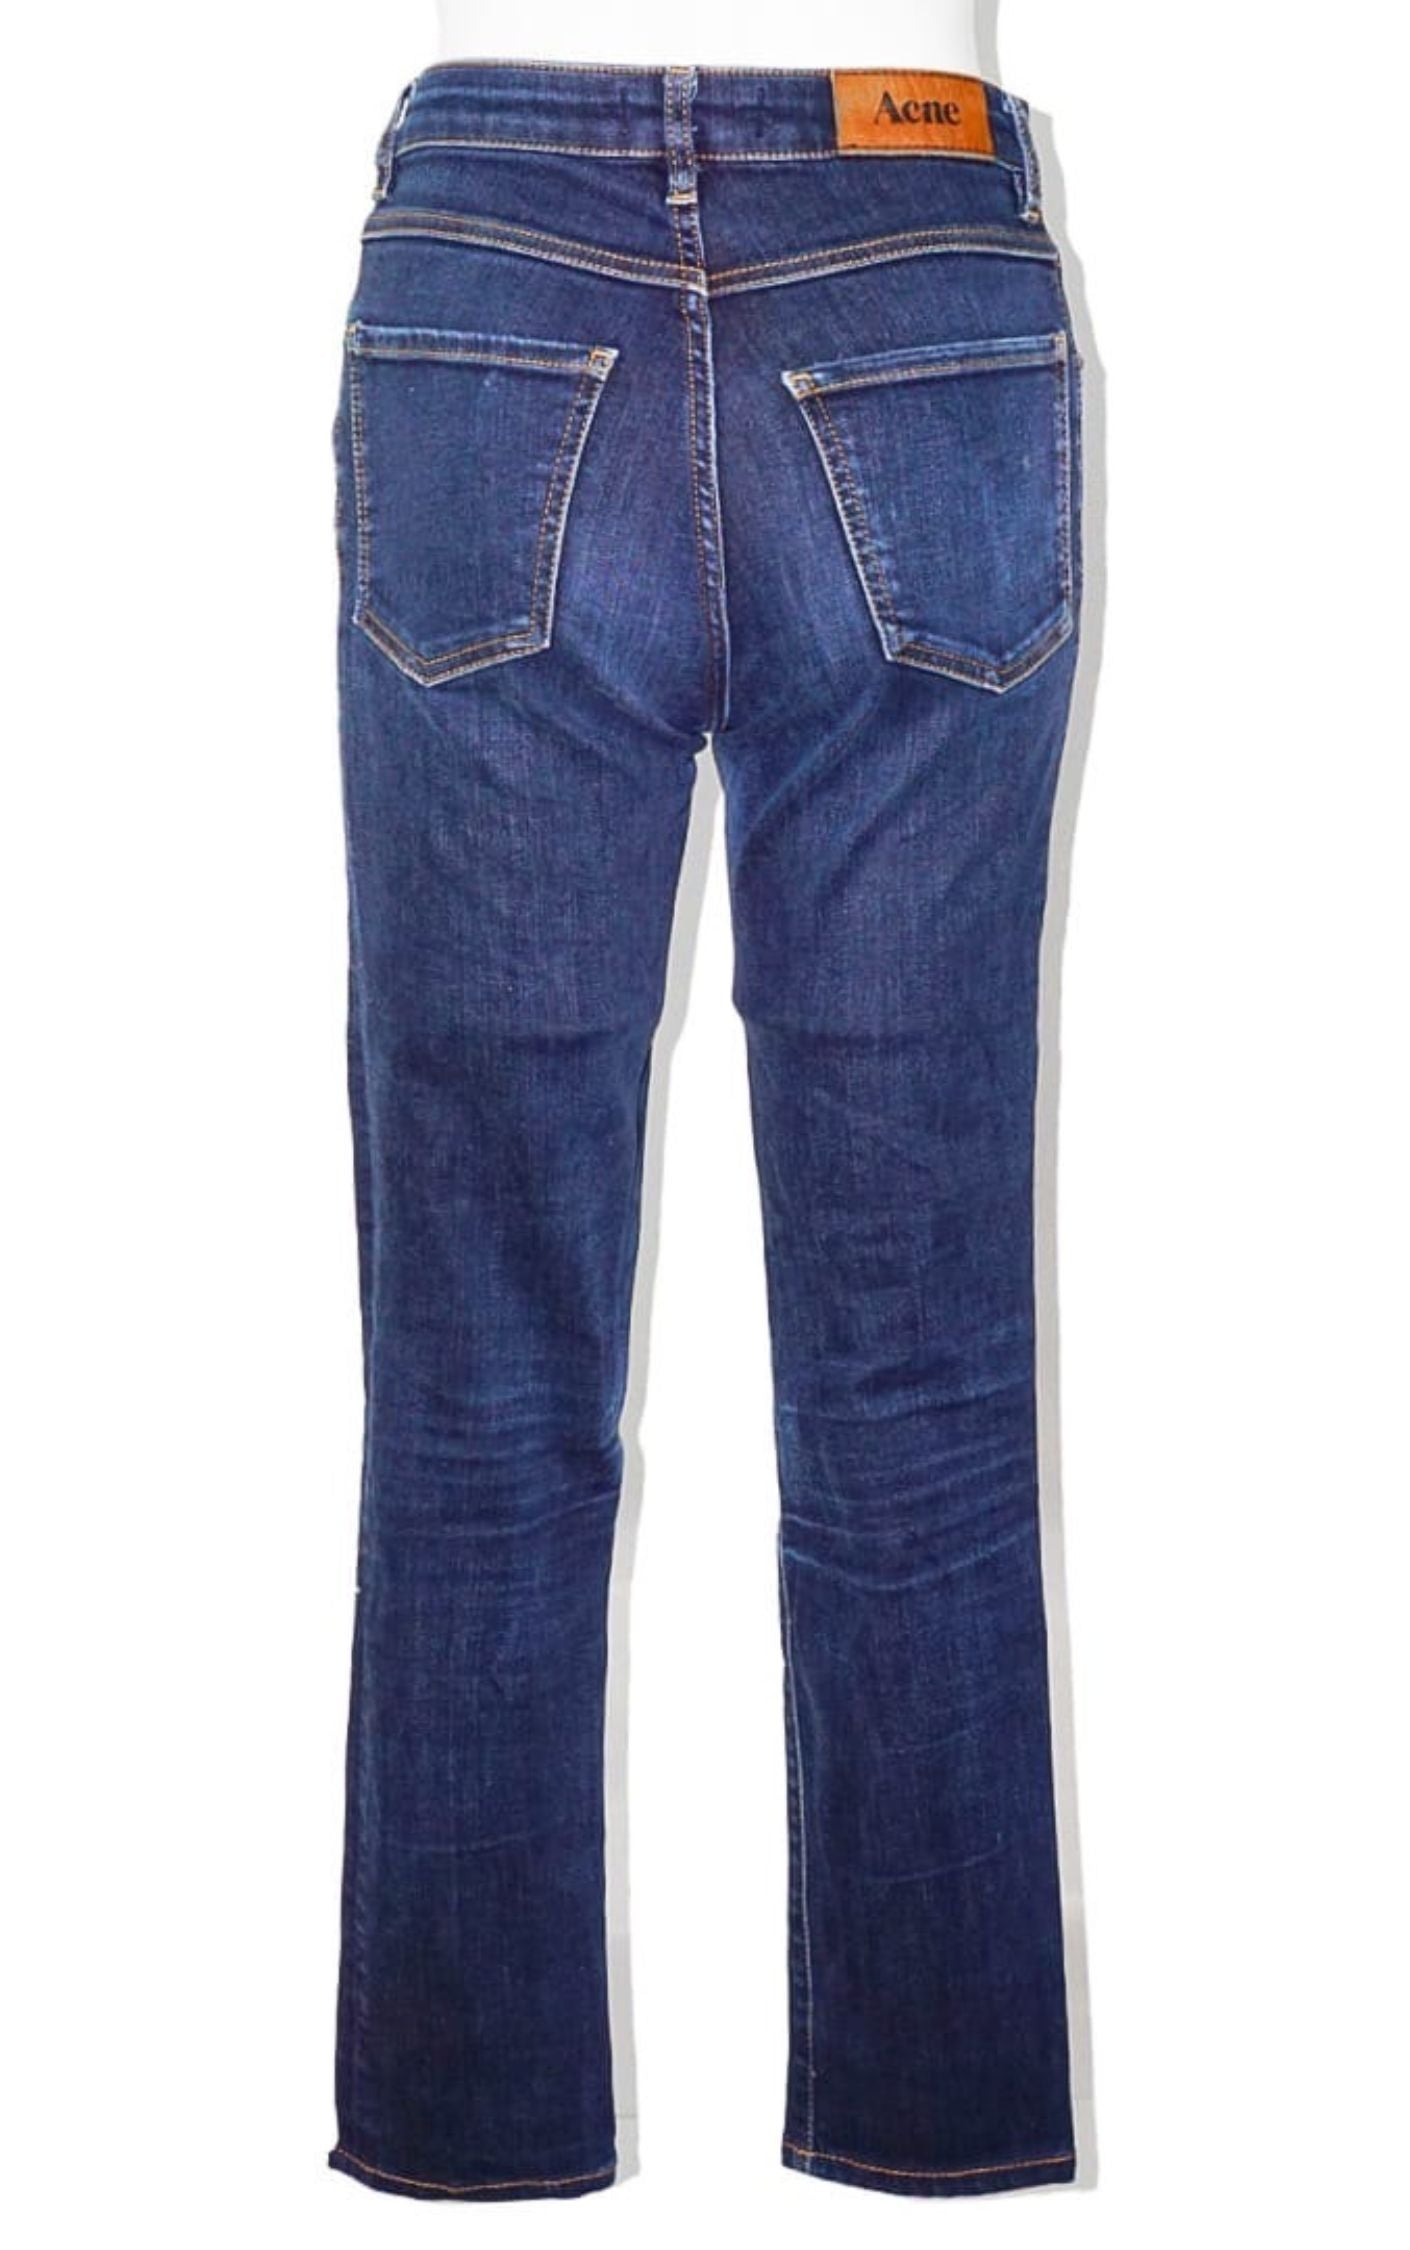 ACNE STUDIOS High Waisted Skinny Jeans resellum